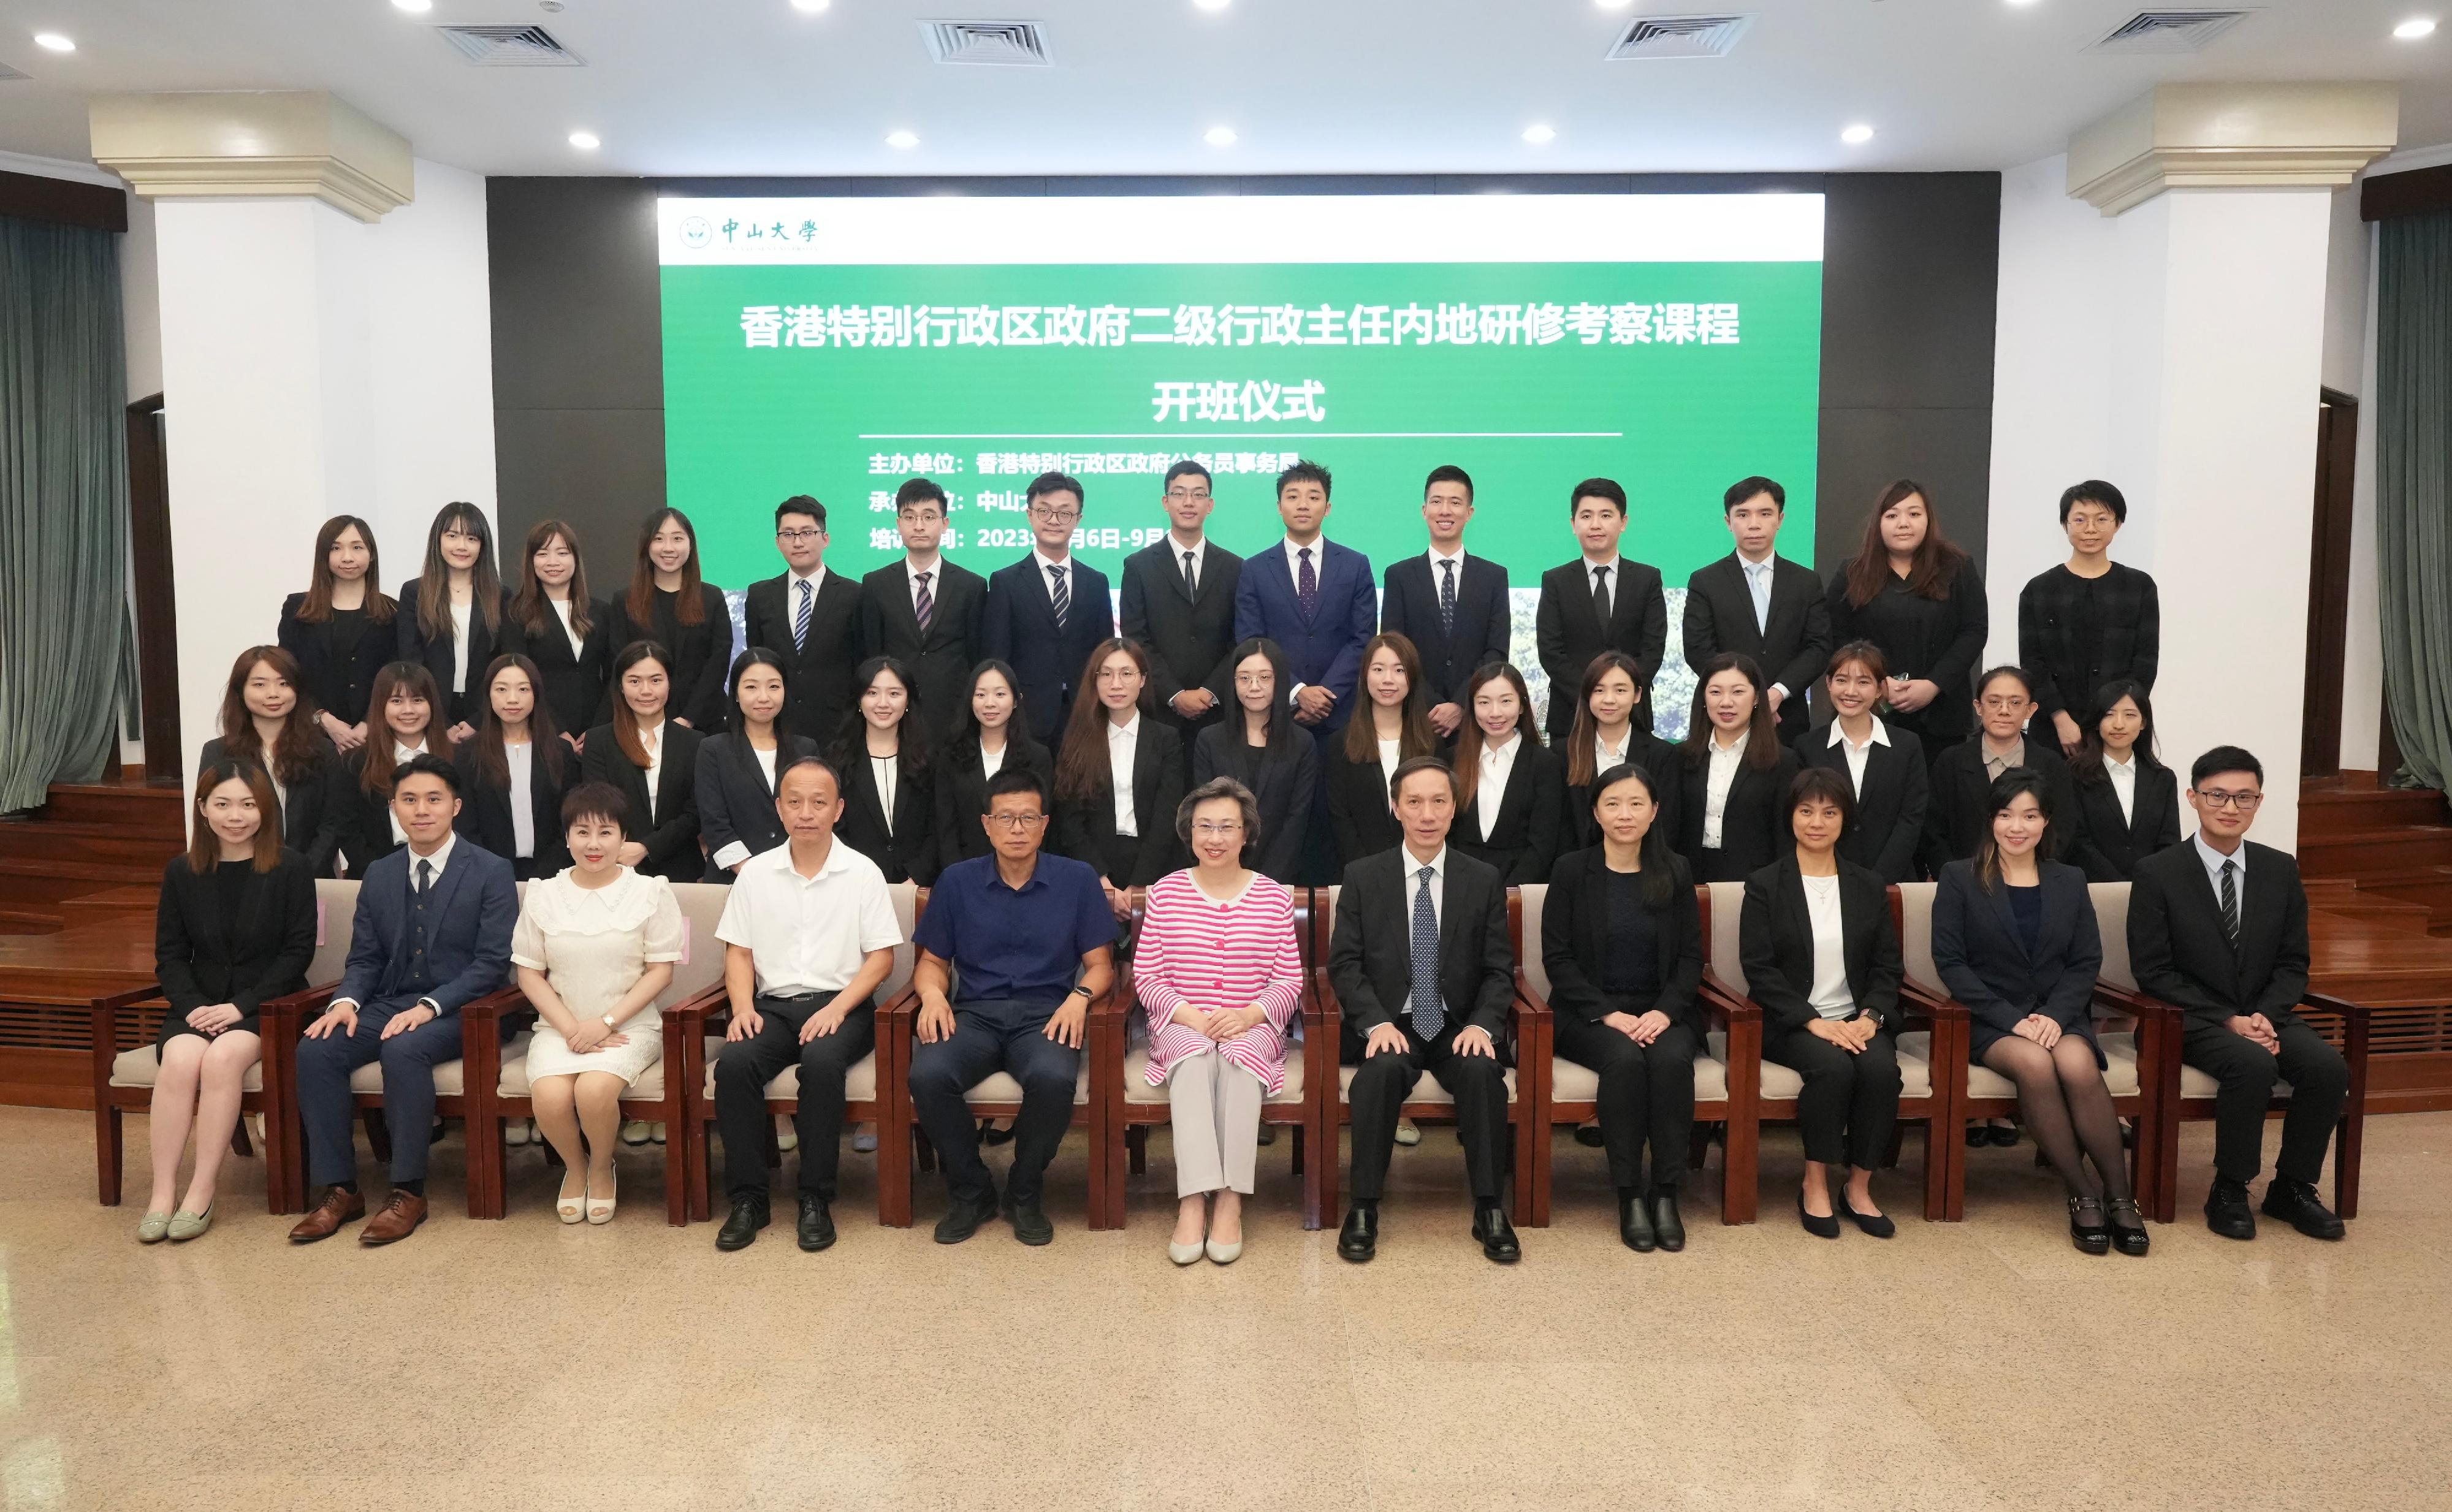 The Hong Kong Special Administrative Region Government's first Mainland training programme dedicated to the grade of Executive Officer (EO) at the entry level was held in Guangzhou today (September 6). Thirty-four Executive Officers II from various bureaux and departments will participate in classroom learning and site visits, marking a further enhancement of the training and career development system for the EO grade by the Government. The Secretary for the Civil Service, Mrs Ingrid Yeung (first row, centre); Vice President of Sun Yat-sen University Mr Yang Donghua (first row, fifth left); and the Director of General Grades of the Civil Service Bureau, Mr Hermes Chan (first row, fifth right), attended the opening ceremony for the training programme at Sun Yat-sen University and are pictured with the programme participants.